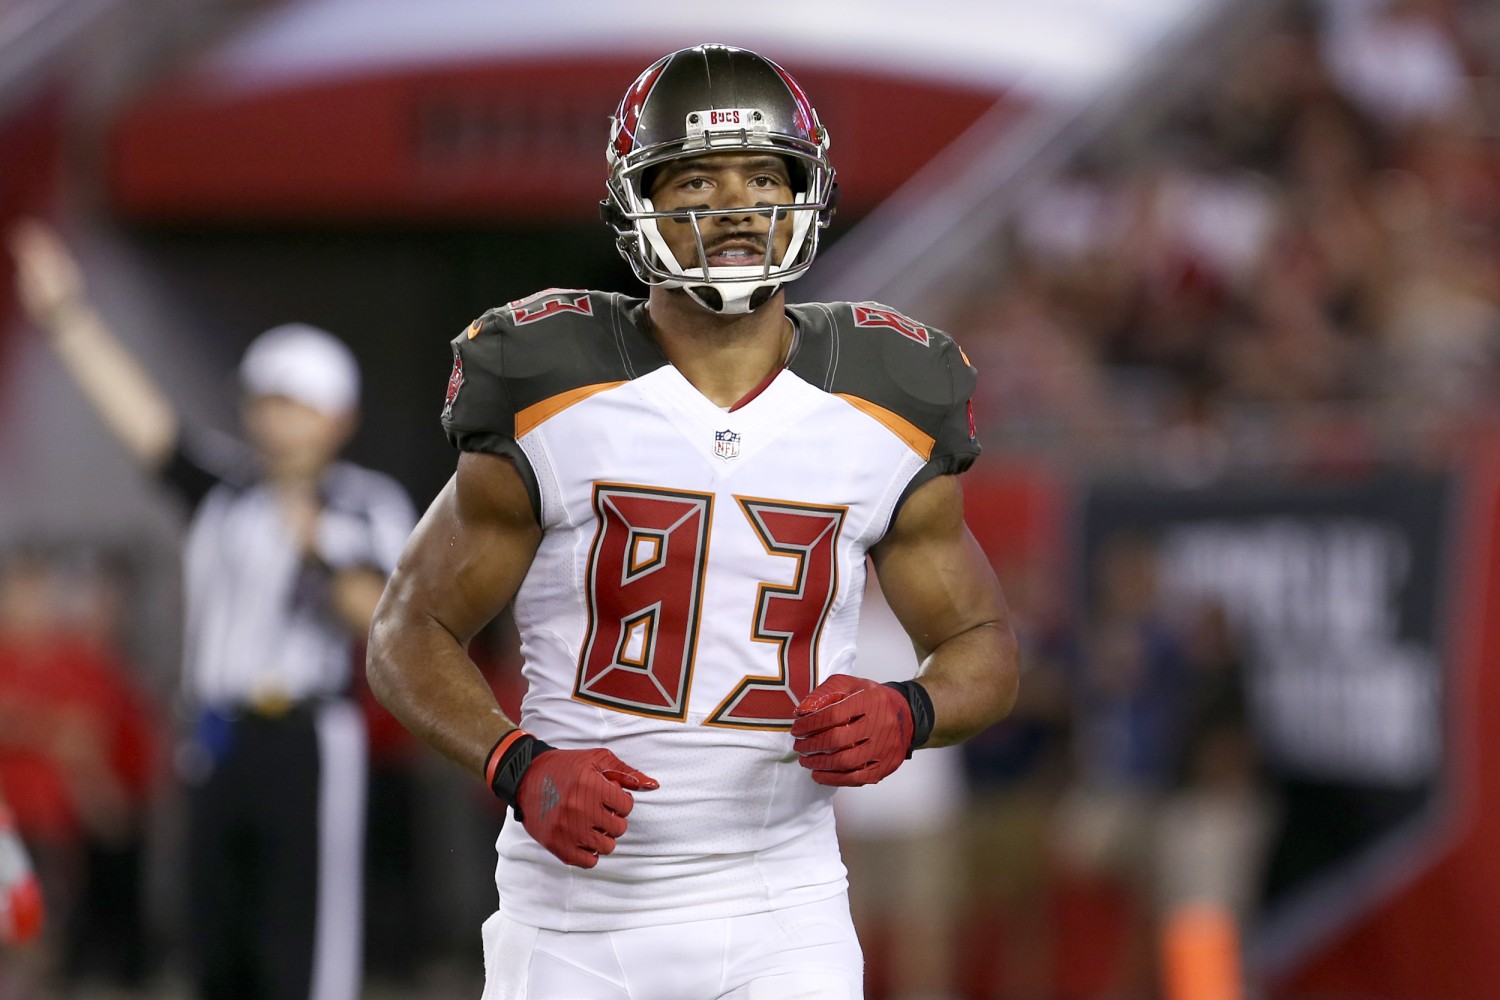 Vincent Jackson, former NFL player found dead in hotel room, had